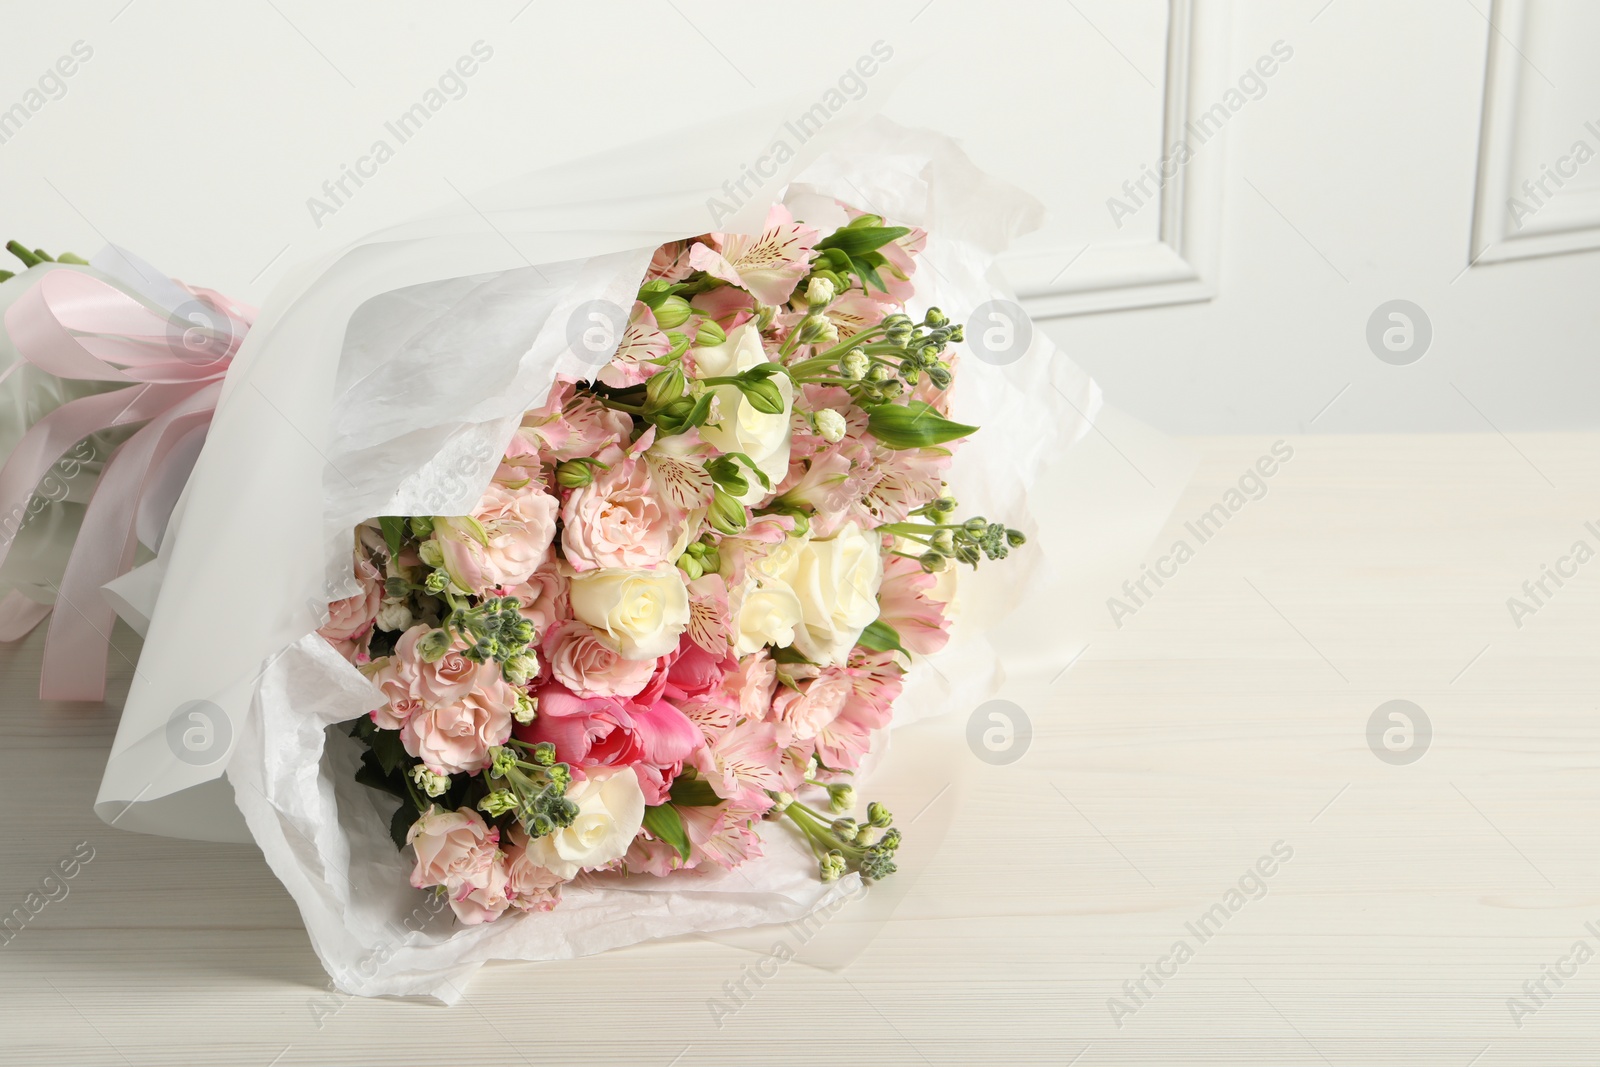 Photo of Beautiful bouquet of fresh flowers on wooden table near white wall, space for text